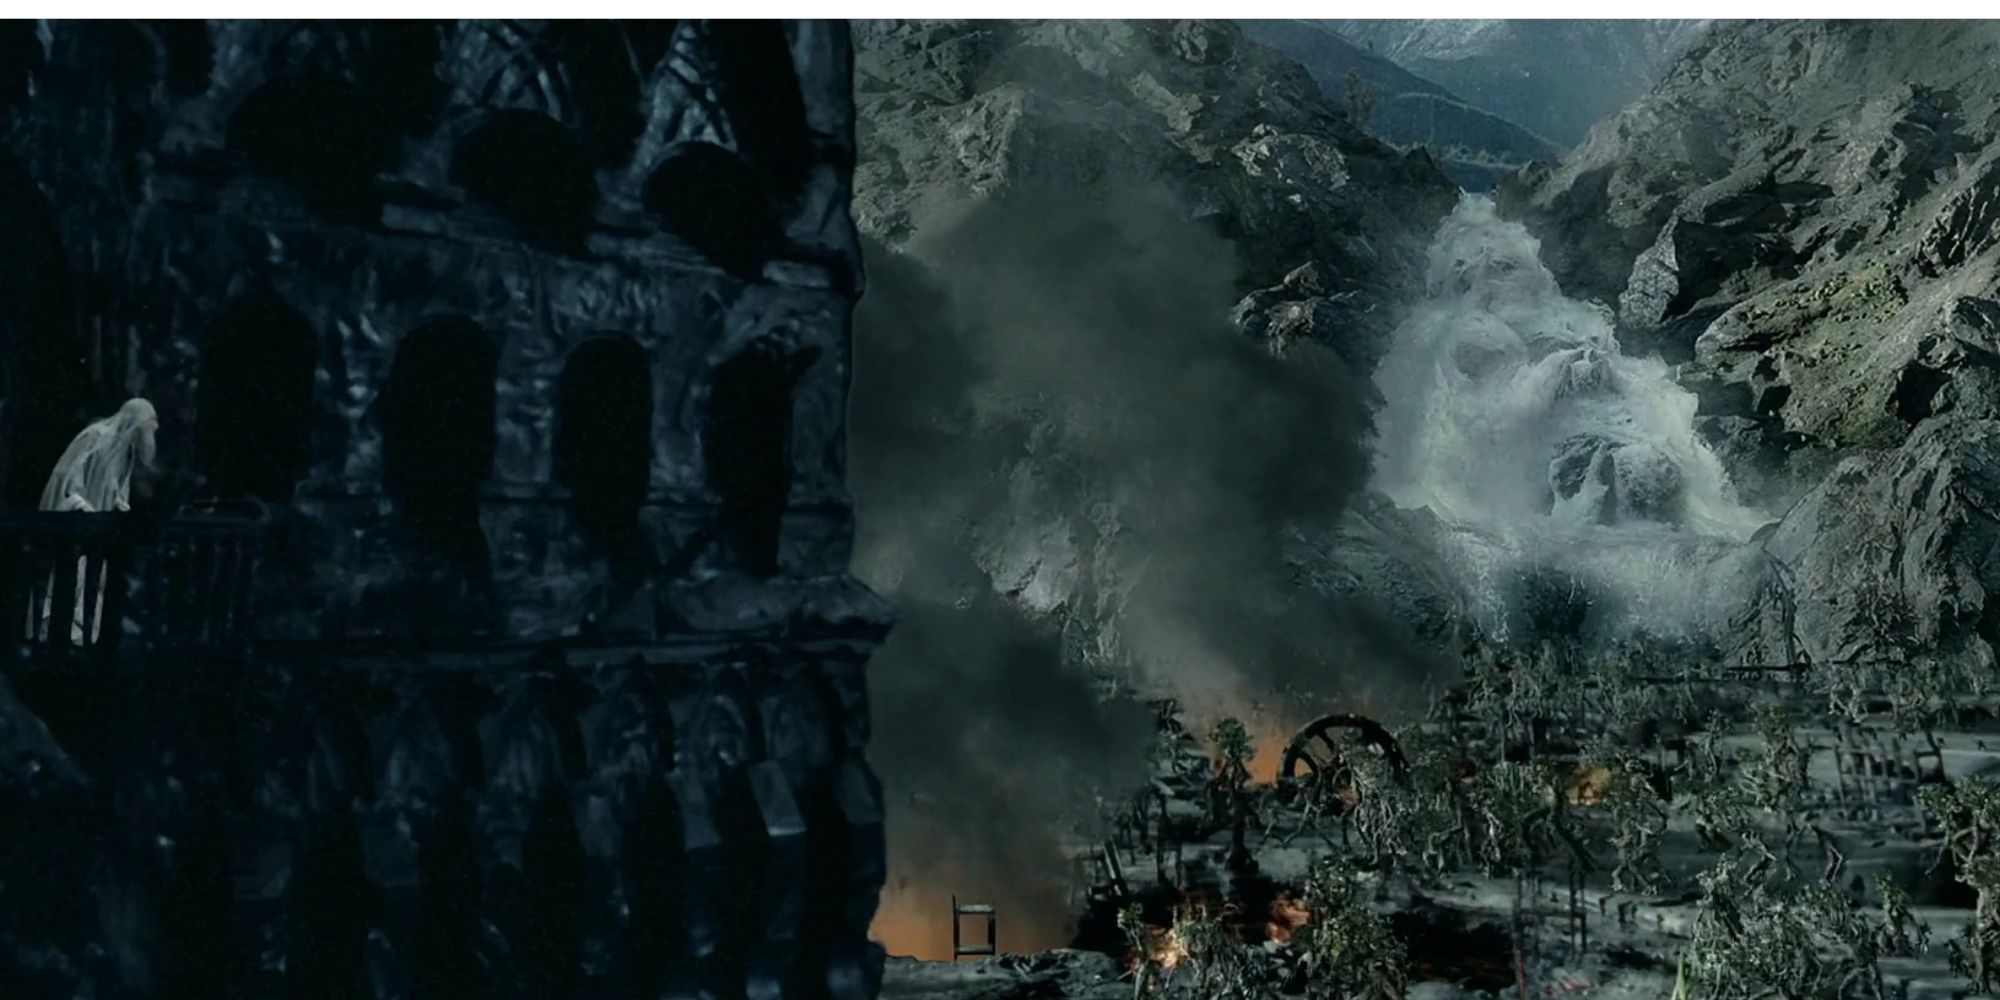 Saruman realizes he is doomed as ents surround his tower and his kingdom is flooded